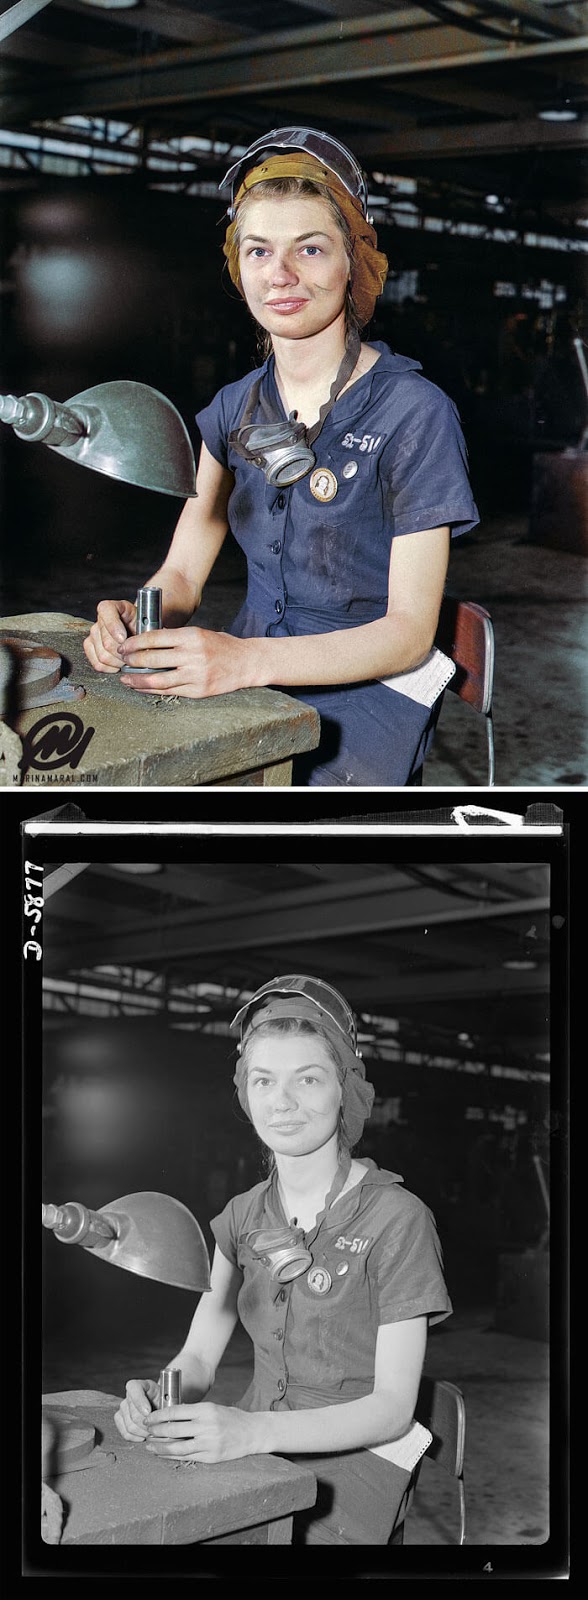 Artist Colorizes Old Black & White Pictures To Change The Way We View Historical Events